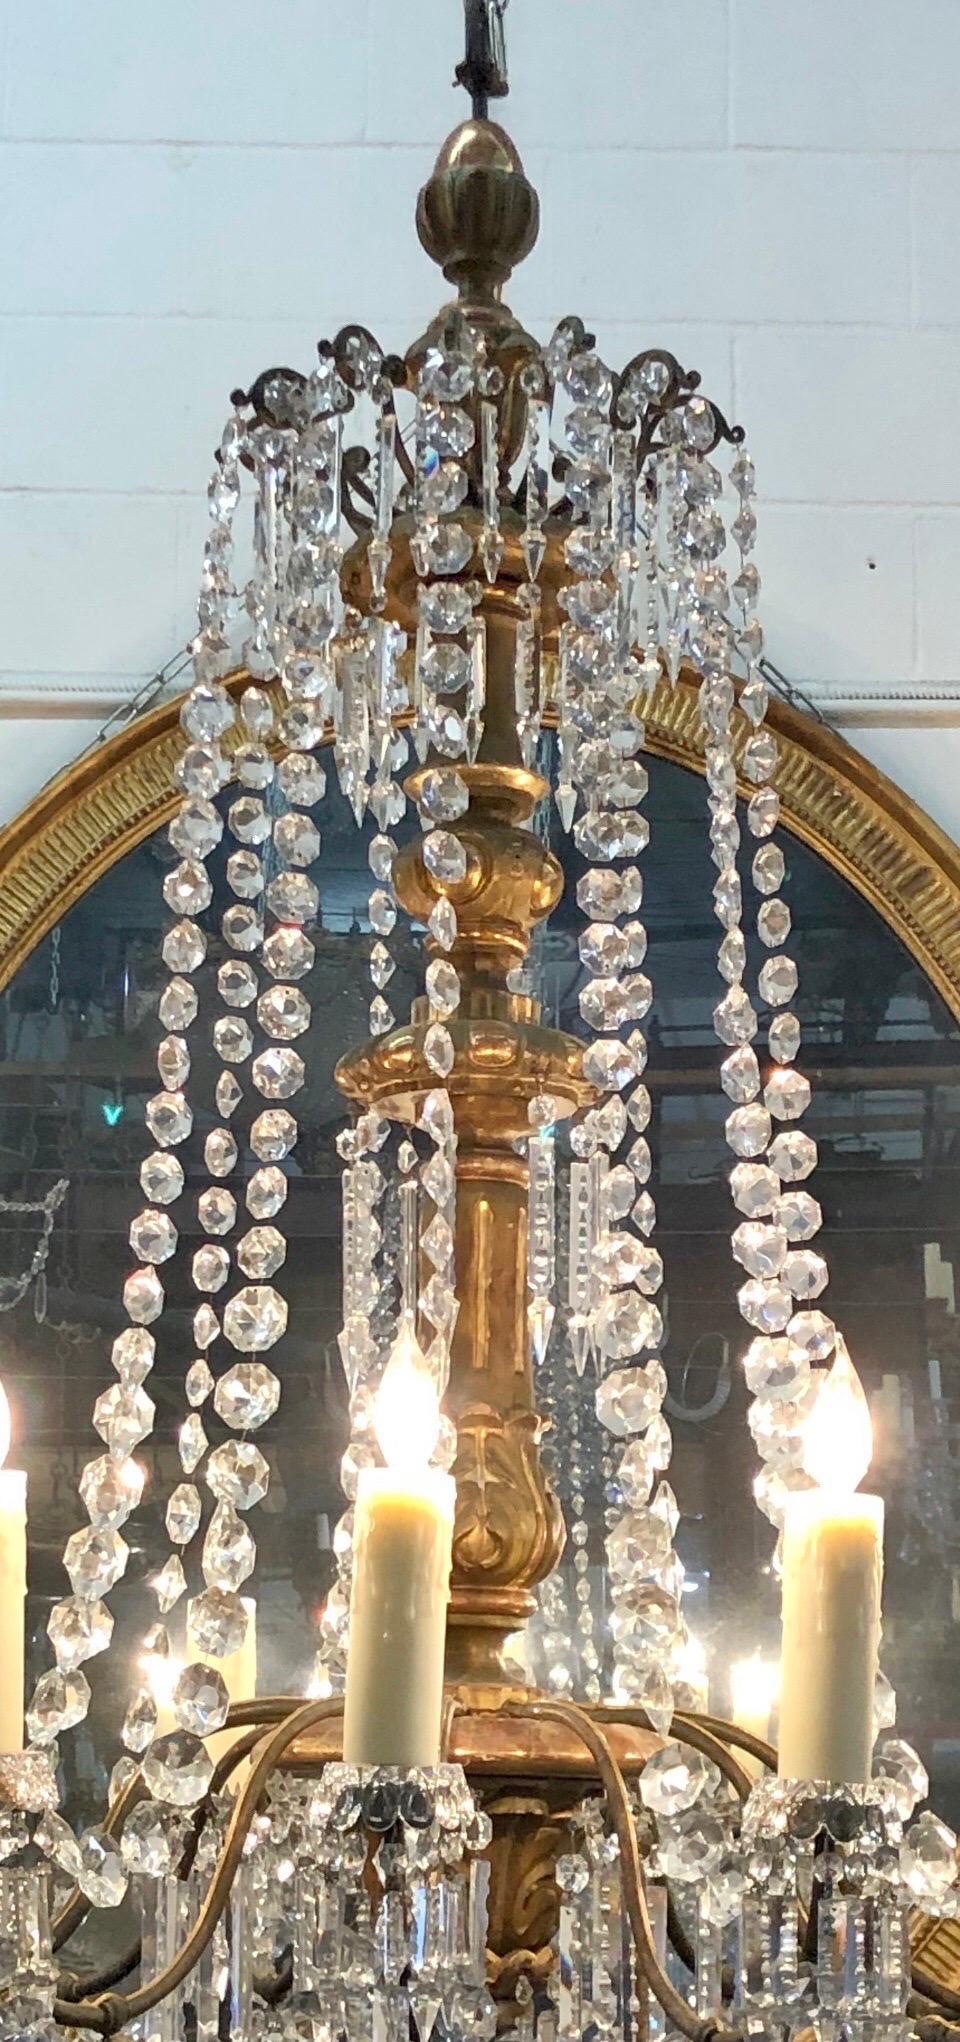 Faceted 18th C. Italian Giltwood, Bronzed Lacquer & Crystal Louis XVI Period Chandelier For Sale